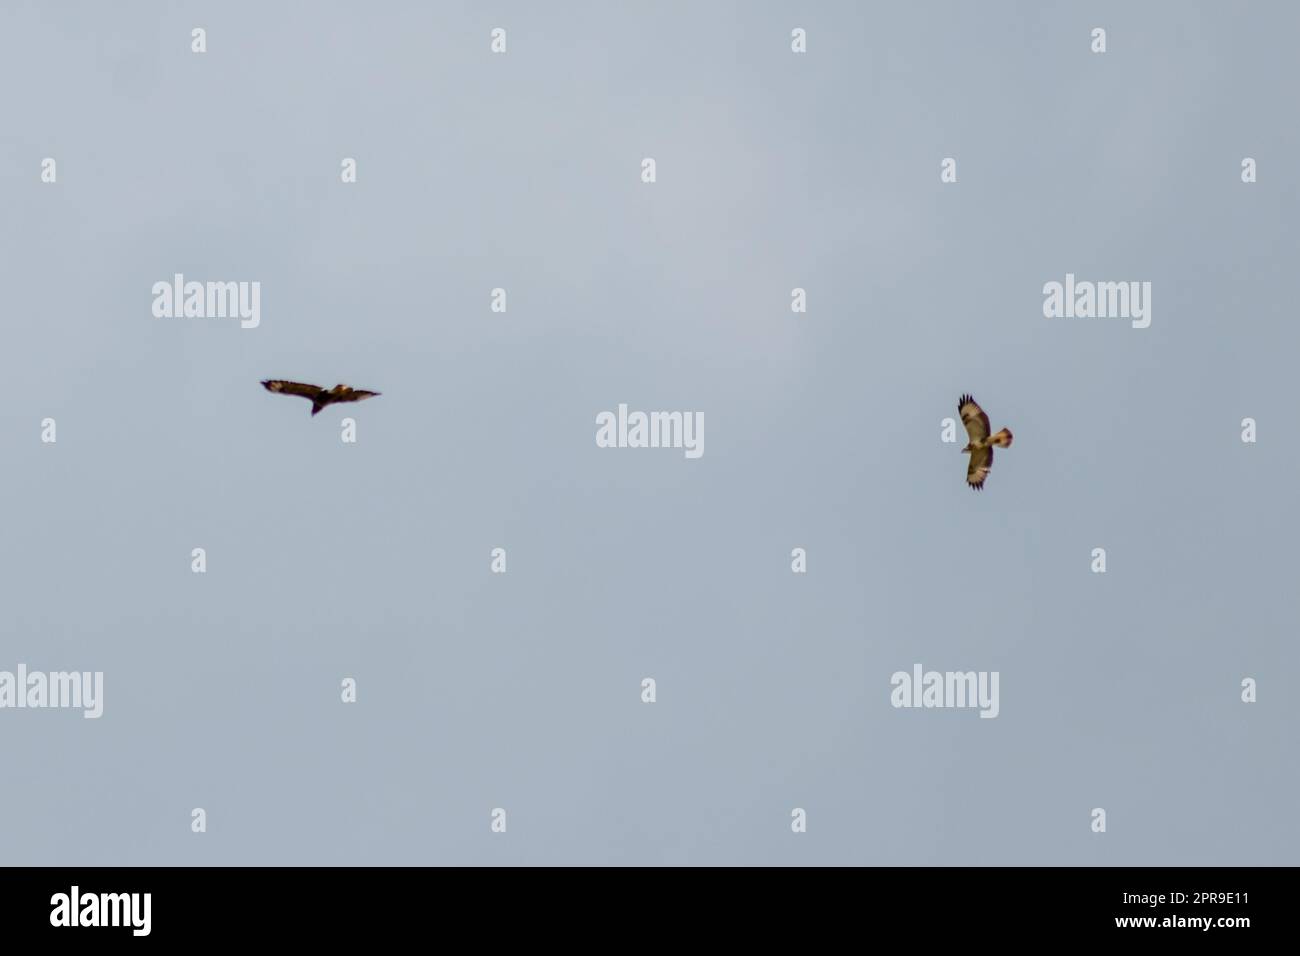 Flying couple of mating falcons with spreaded wings and brown feathers or golden eagles (aquila chrysaetos) hunting for other birds, mice and rats as bird of prey in sky background in mating season Stock Photo